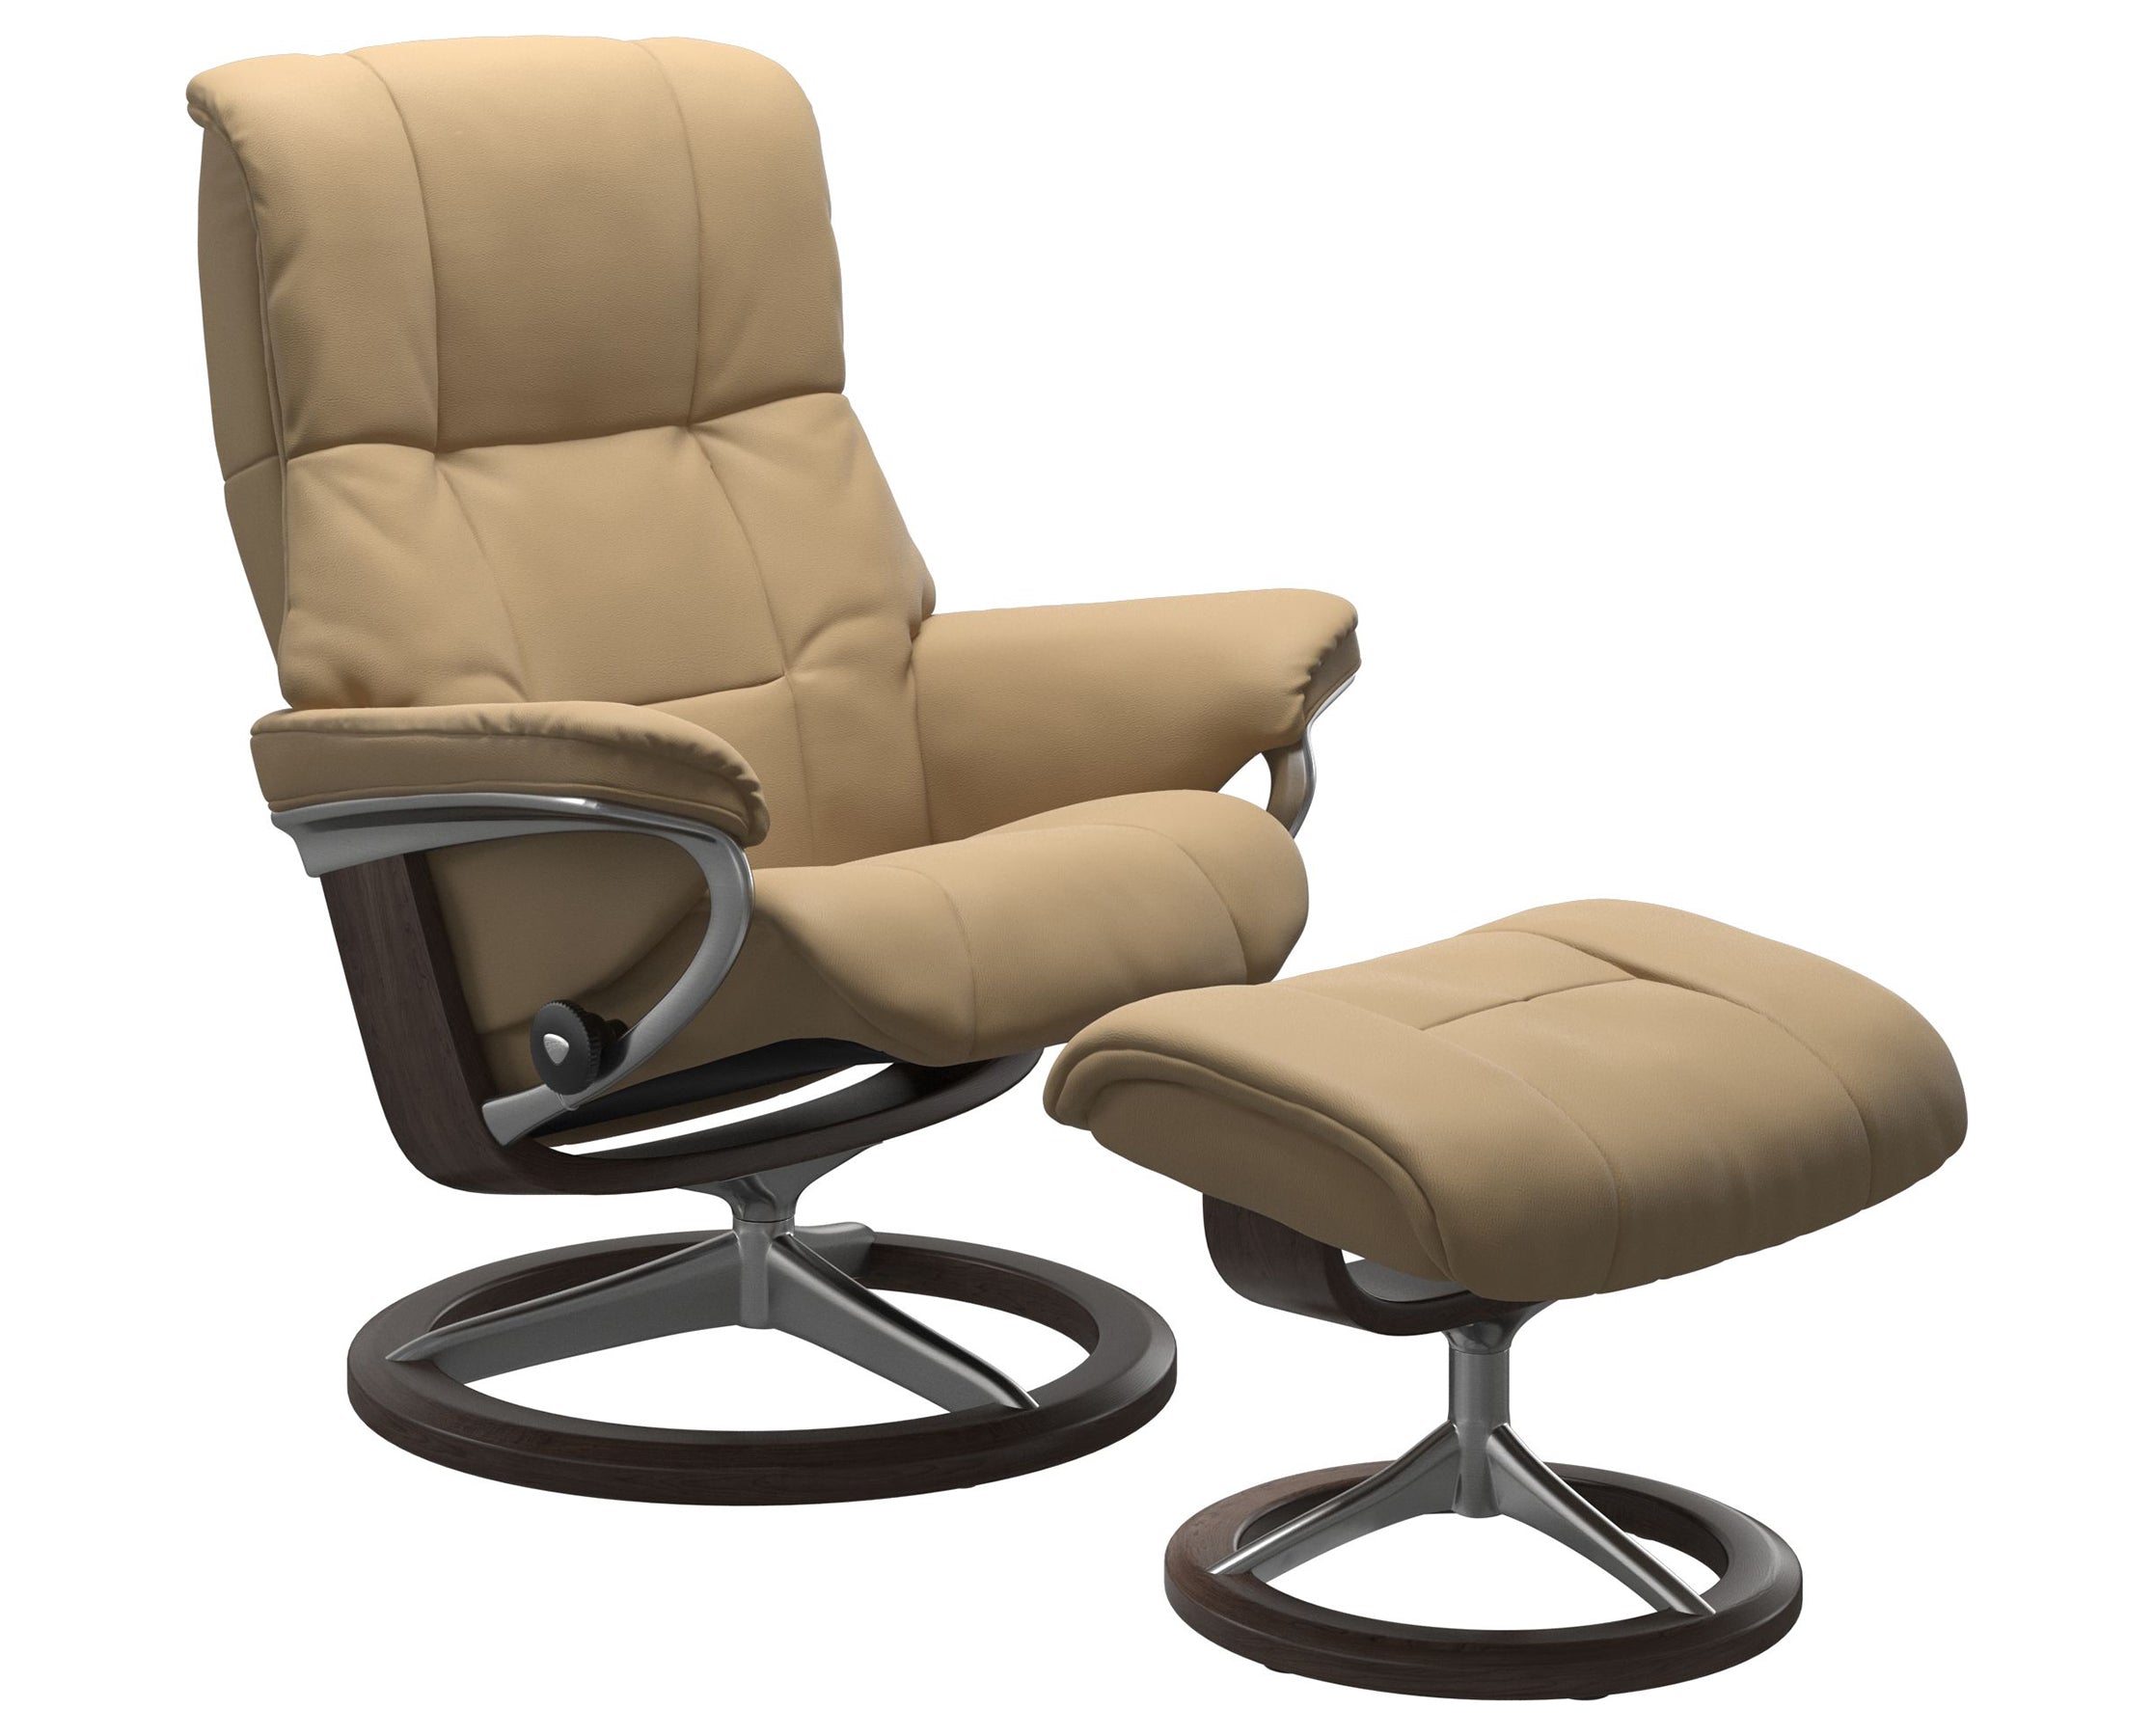 Paloma Leather Sand S/M/L and Wenge Base | Stressless Mayfair Signature Recliner | Valley Ridge Furniture